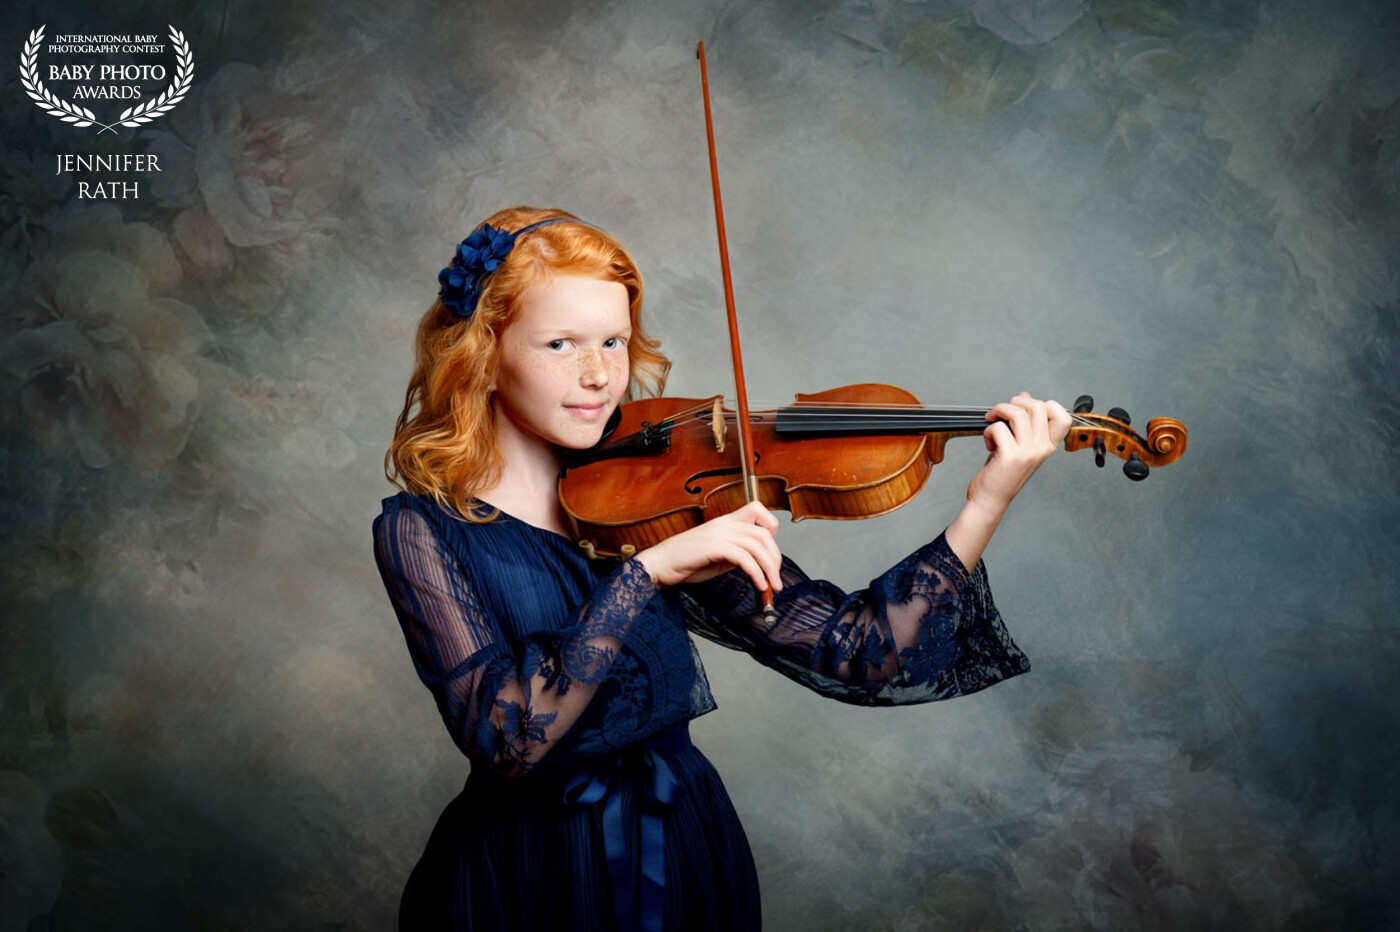 When I found out that this girl is a passionate violin player, I had to incinerate her with her violin.